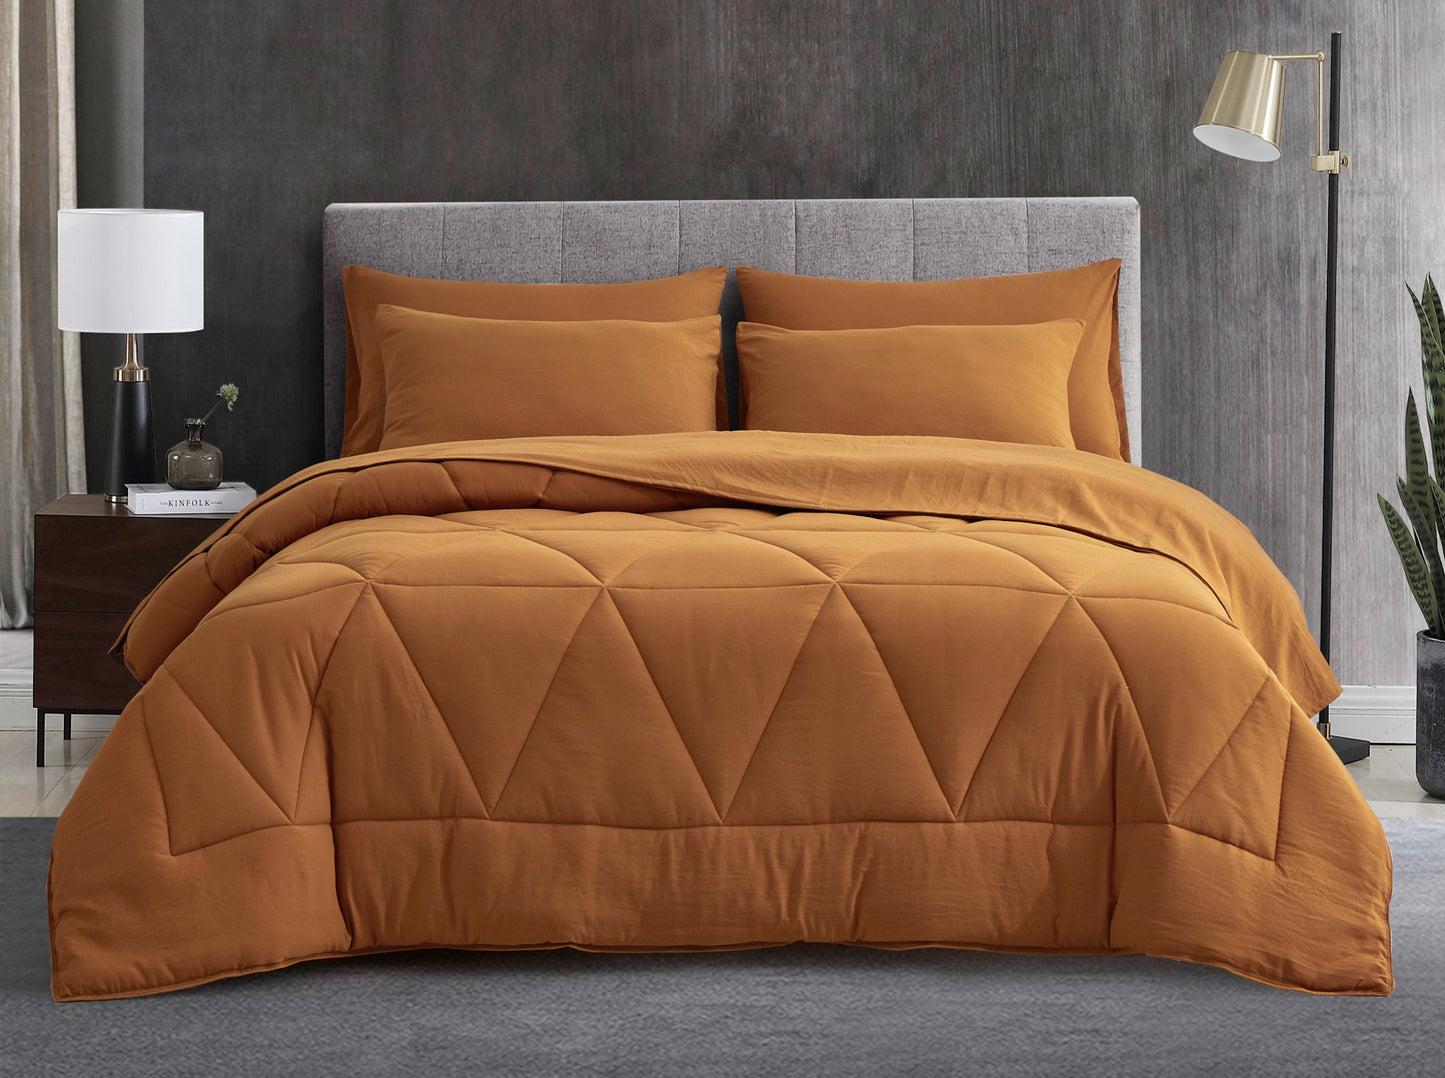 Jasper Geometric Triangle Quilted Bed in a Bag Comforter Set